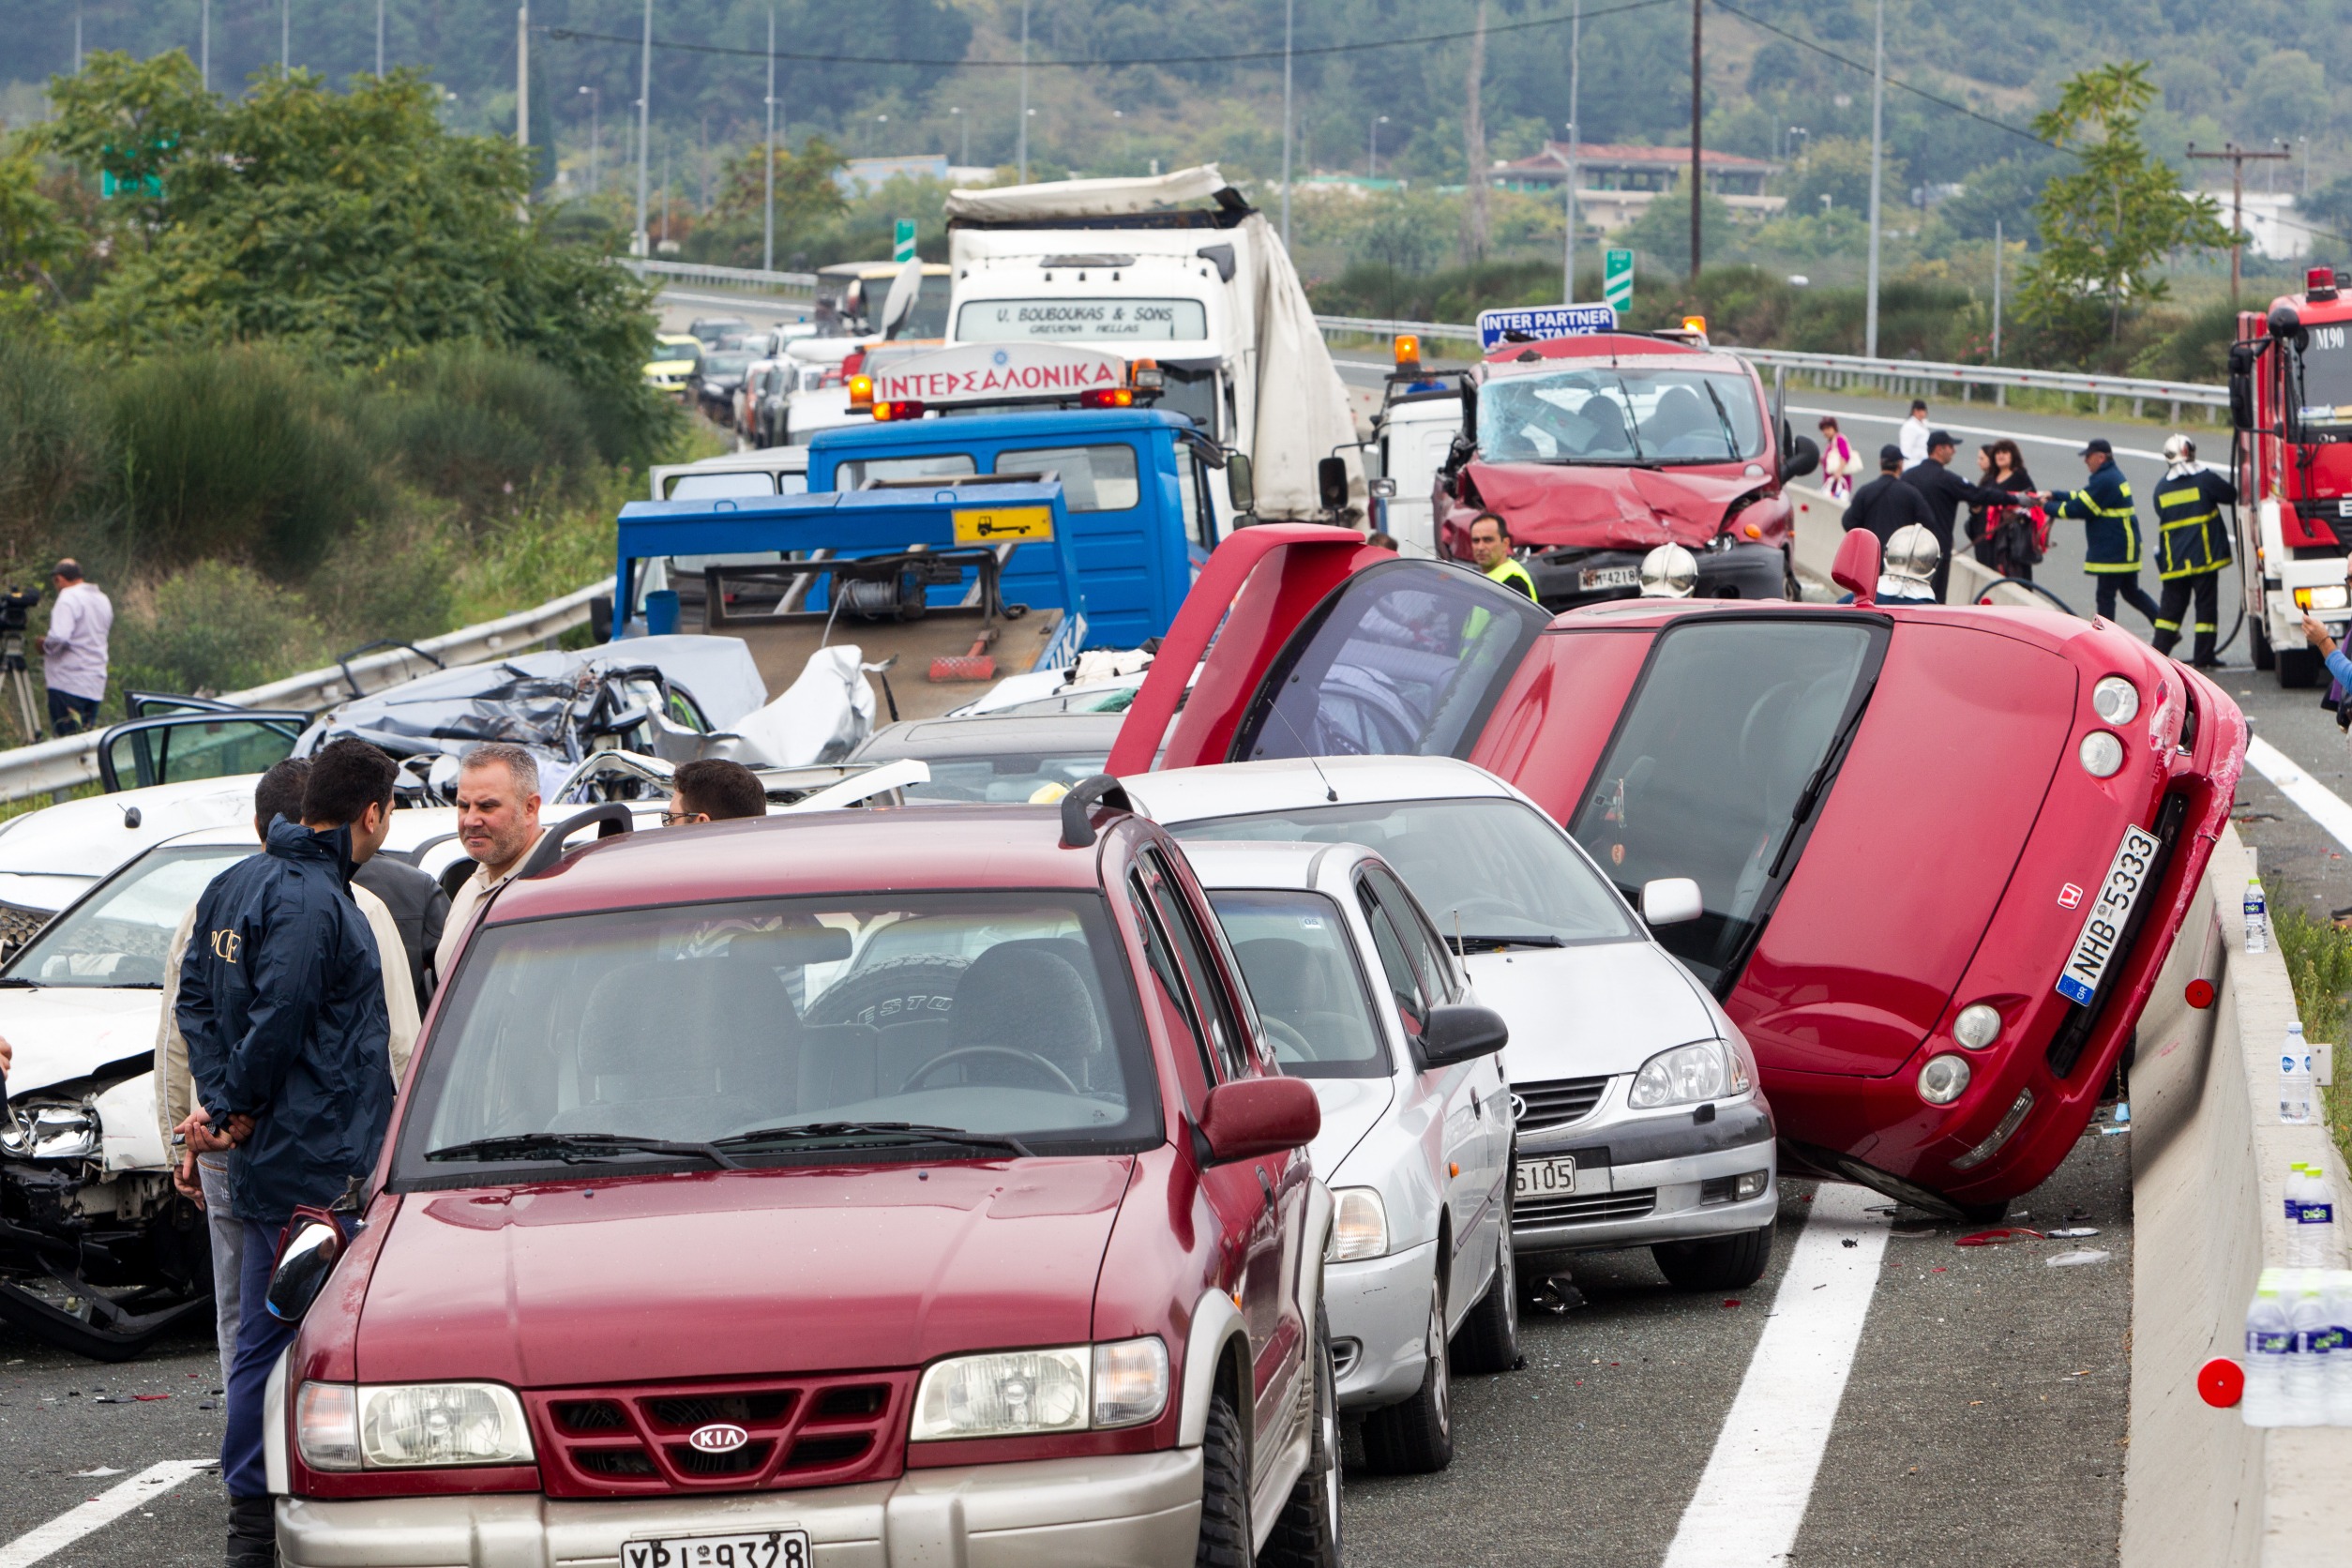 Pile up can lead to serious injuries when they occur.